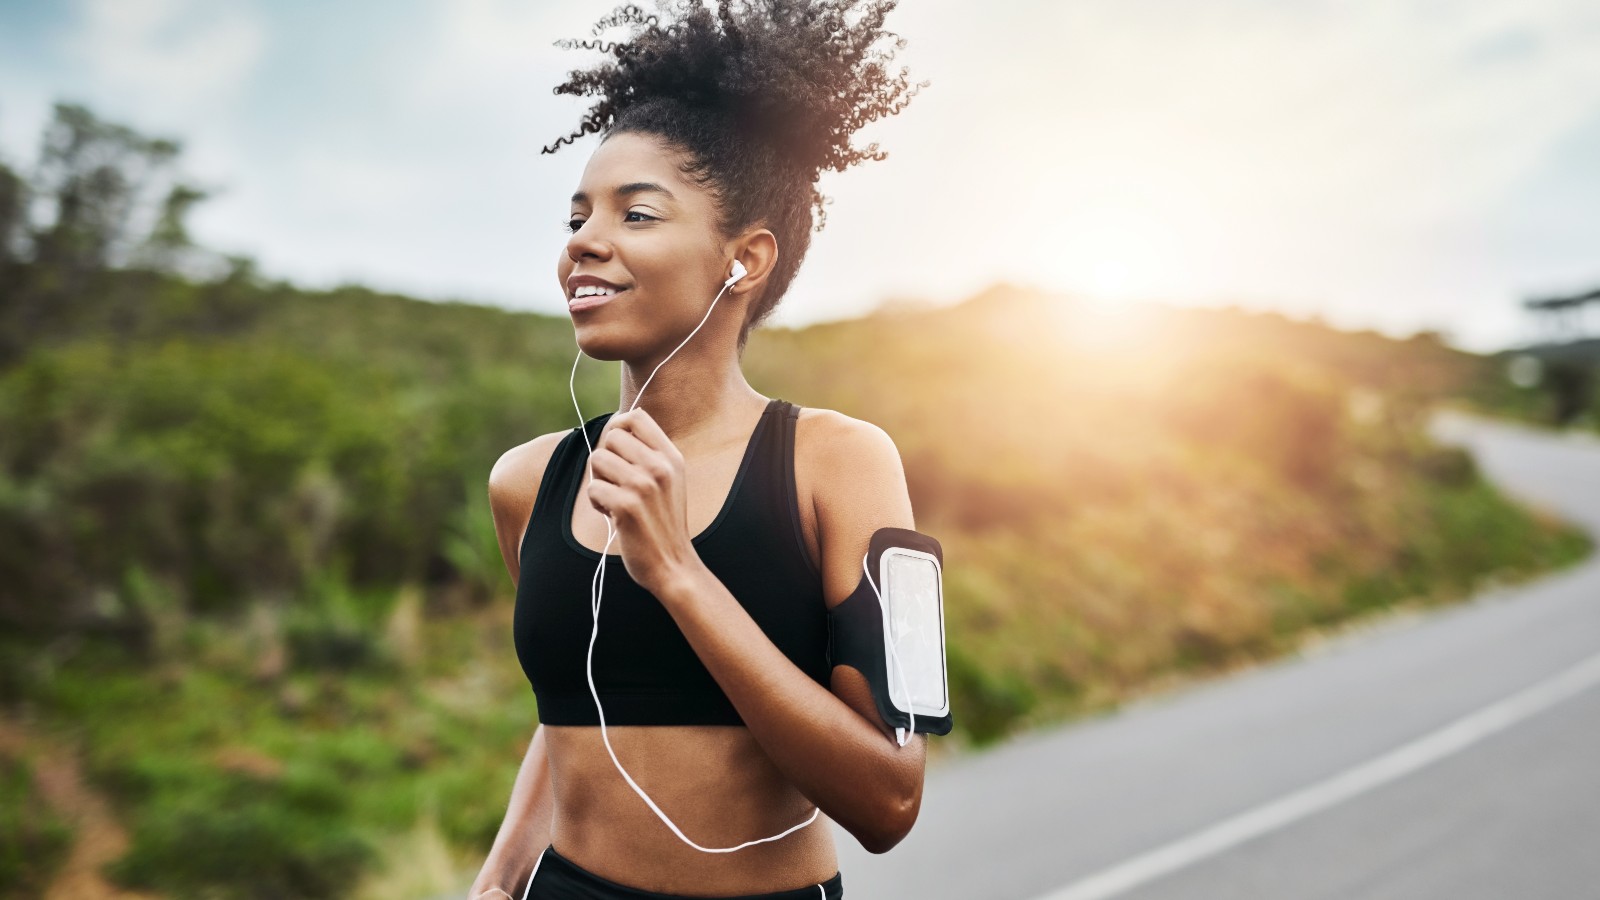 The music you should listen to during your workout, according to ...